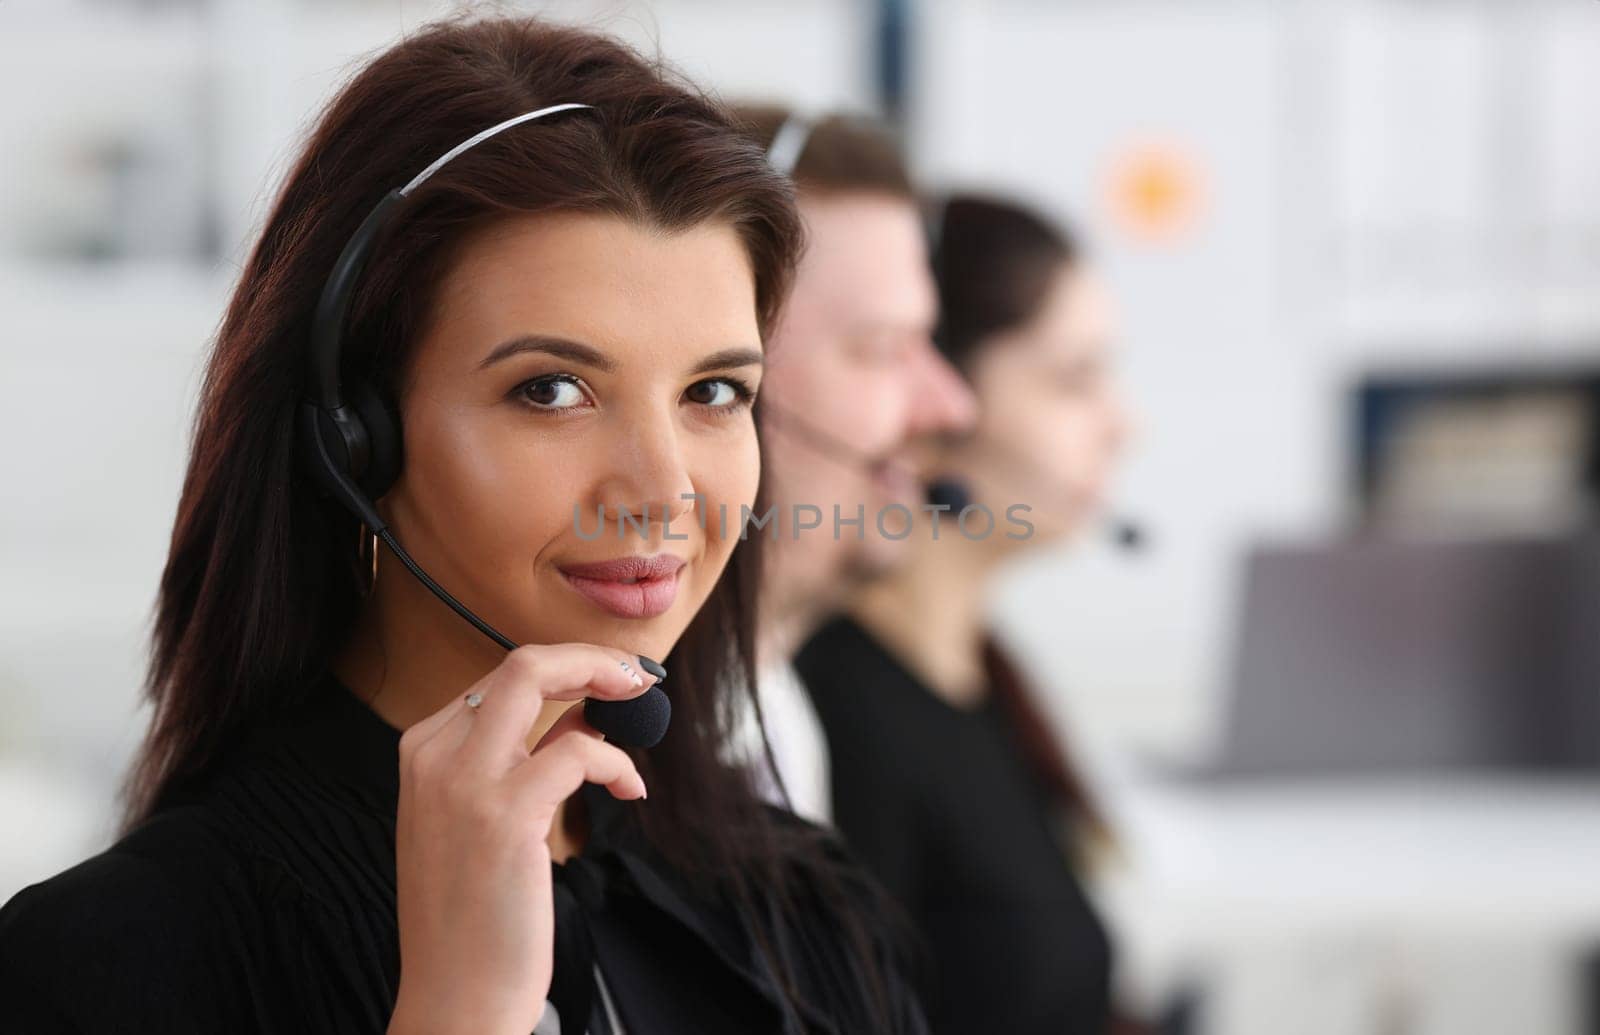 Three call centre service operators at work. Portrait of smiling pretty brunette woman at workplace employment effective mediation negotiation participation solve problem real time aid job concept